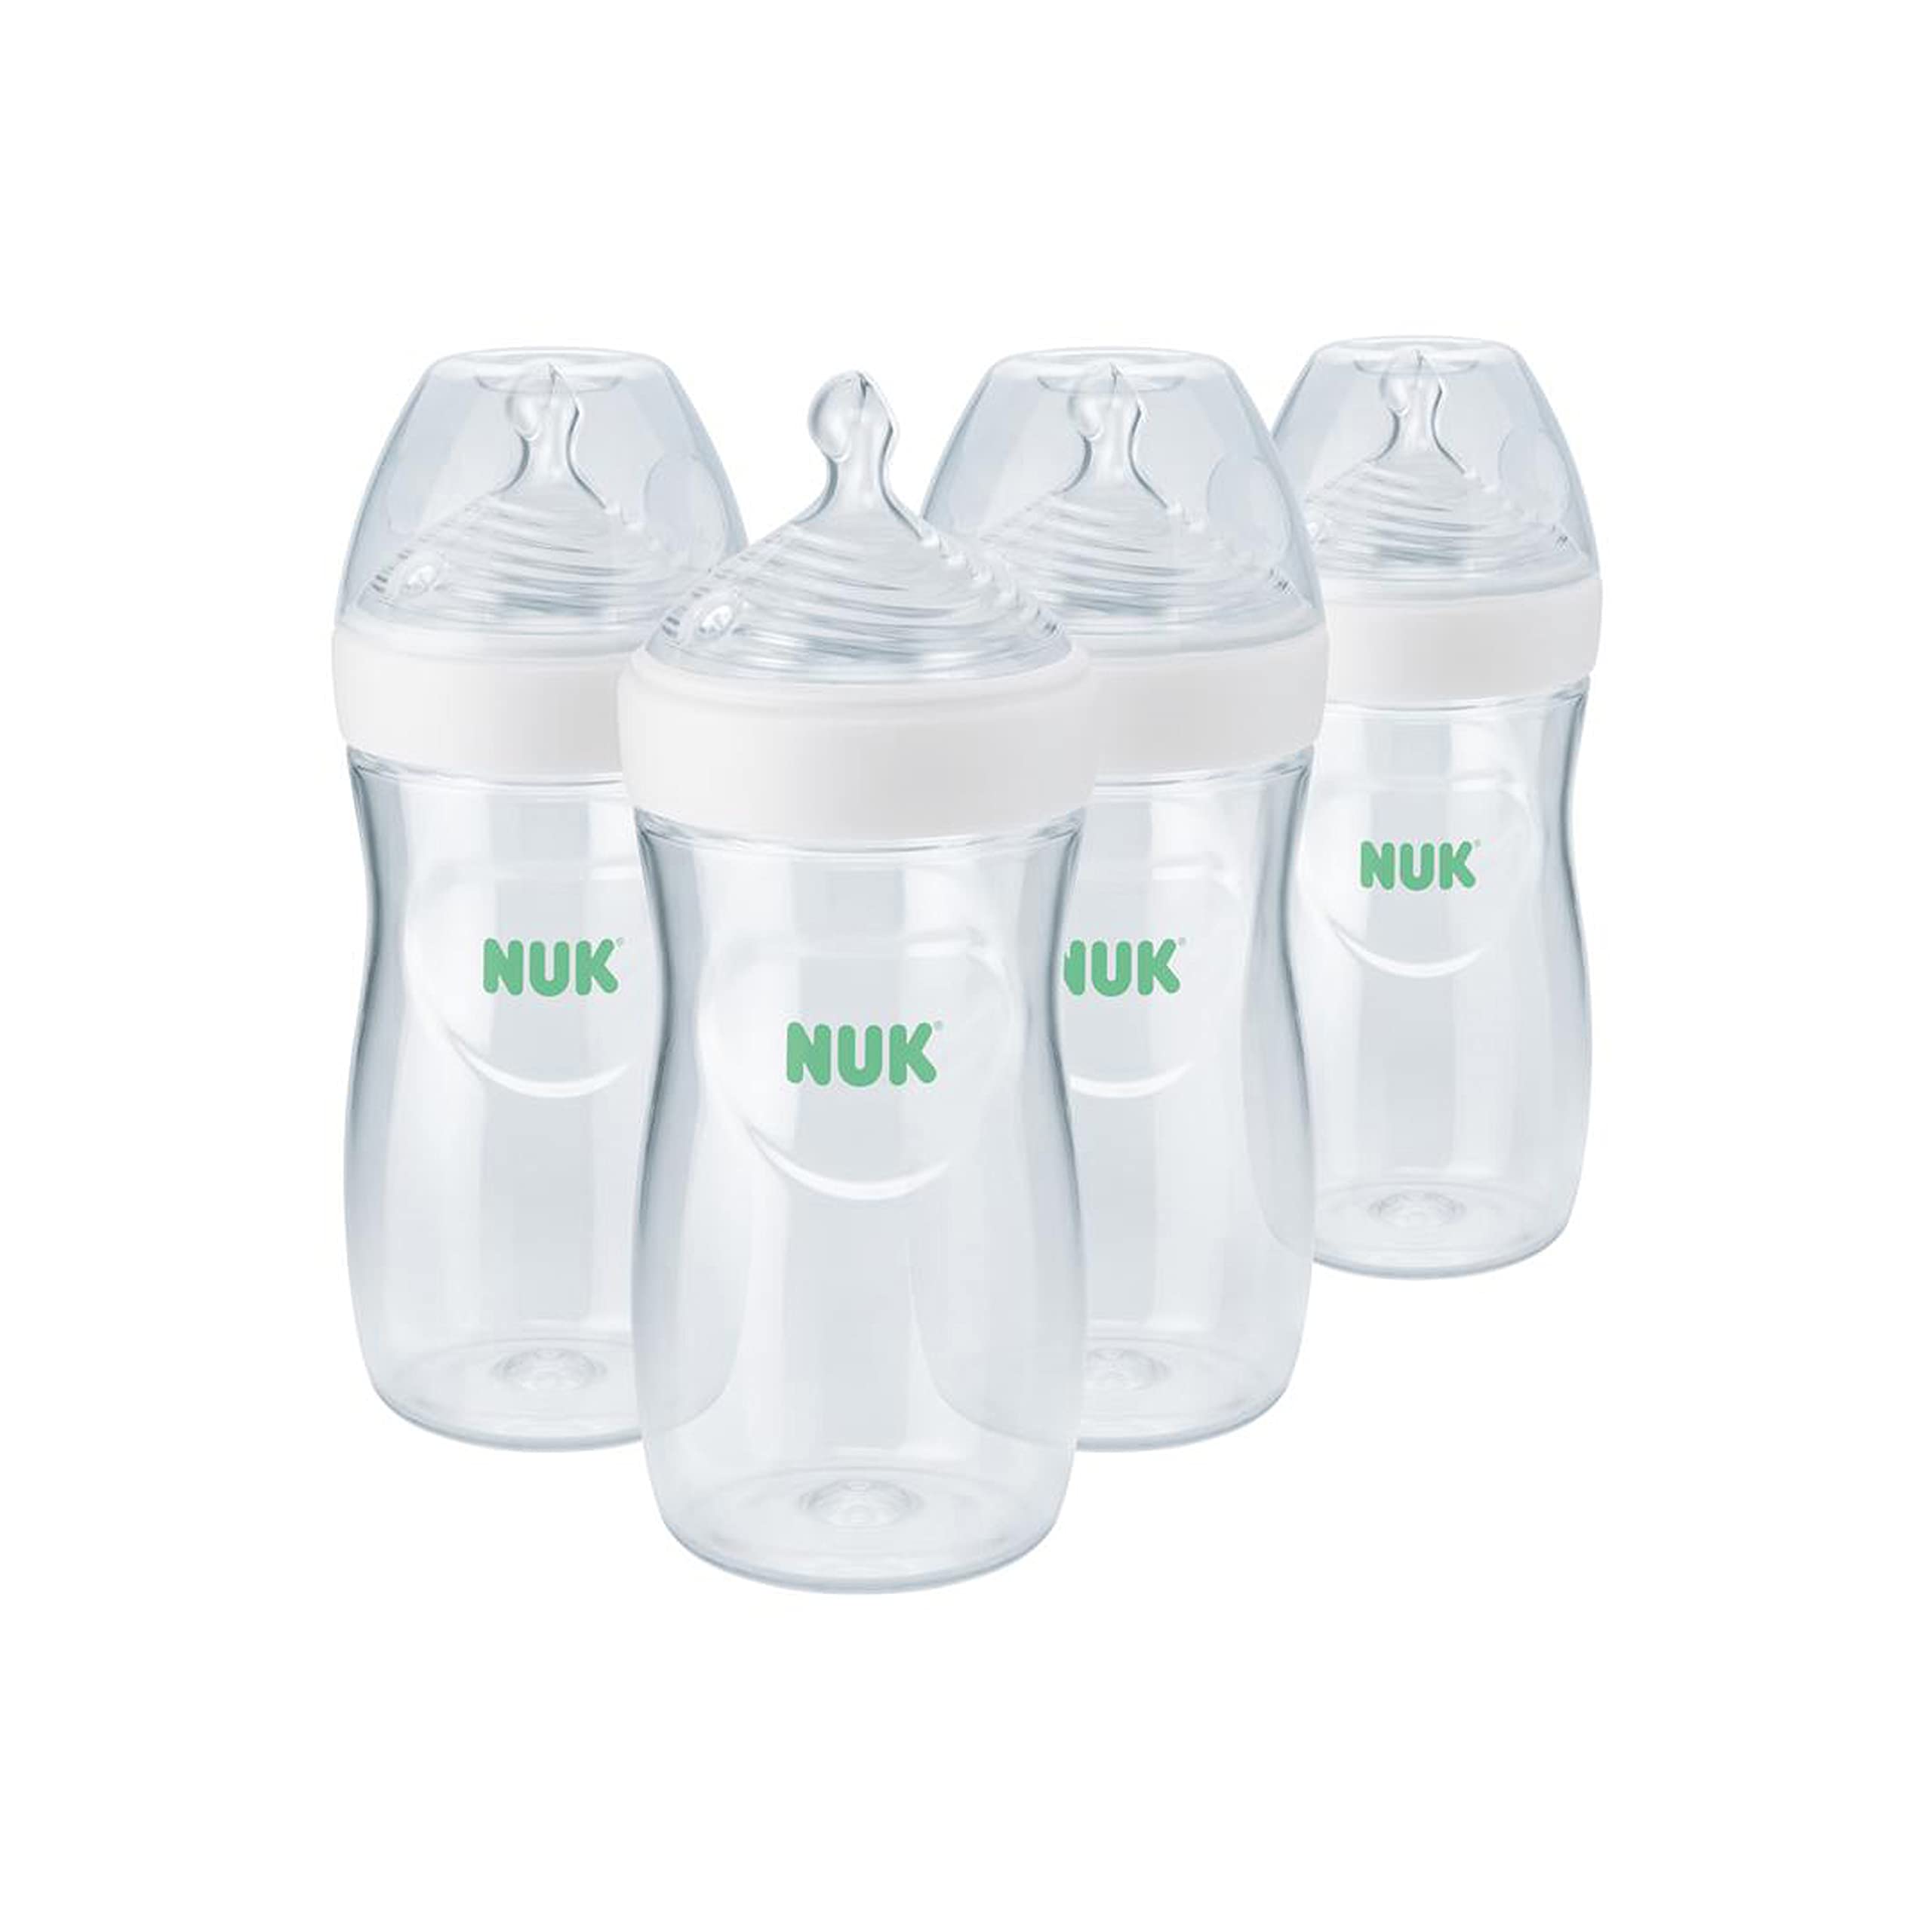 NUK Simply Natural Bottle with SafeTemp, Neutral, 9 Oz, 4 Count